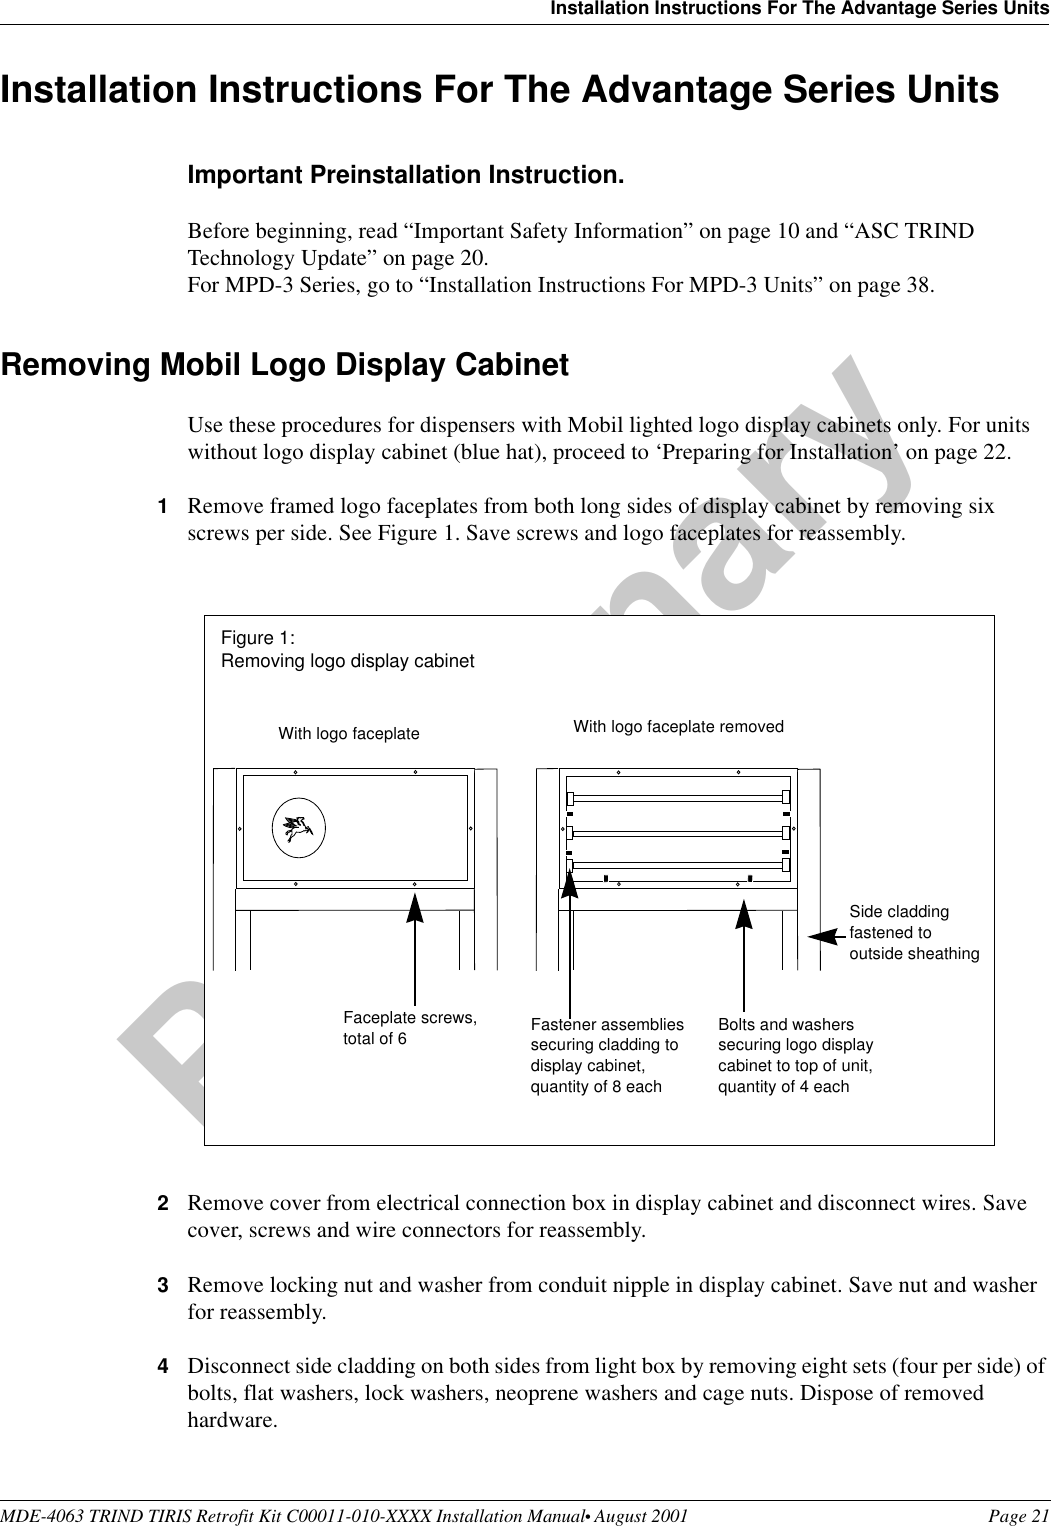 MDE-4063 TRIND TIRIS Retrofit Kit C00011-010-XXXX Installation Manual• August 2001 Page 21Installation Instructions For The Advantage Series UnitsPreliminary08-24-01Installation Instructions For The Advantage Series UnitsImportant Preinstallation Instruction.Before beginning, read “Important Safety Information” on page 10 and “ASC TRIND Technology Update” on page 20.For MPD-3 Series, go to “Installation Instructions For MPD-3 Units” on page 38.Removing Mobil Logo Display Cabinet Use these procedures for dispensers with Mobil lighted logo display cabinets only. For units without logo display cabinet (blue hat), proceed to ‘Preparing for Installation’ on page 22.1Remove framed logo faceplates from both long sides of display cabinet by removing six screws per side. See Figure 1. Save screws and logo faceplates for reassembly.2Remove cover from electrical connection box in display cabinet and disconnect wires. Save cover, screws and wire connectors for reassembly.3Remove locking nut and washer from conduit nipple in display cabinet. Save nut and washer for reassembly.4Disconnect side cladding on both sides from light box by removing eight sets (four per side) of bolts, flat washers, lock washers, neoprene washers and cage nuts. Dispose of removed hardware.Fastener assemblies securing cladding to display cabinet, quantity of 8 eachWith logo faceplate With logo faceplate removedBolts and washers securing logo display cabinet to top of unit, quantity of 4 eachSide cladding fastened to outside sheathingFaceplate screws,total of 6Figure 1: Removing logo display cabinet